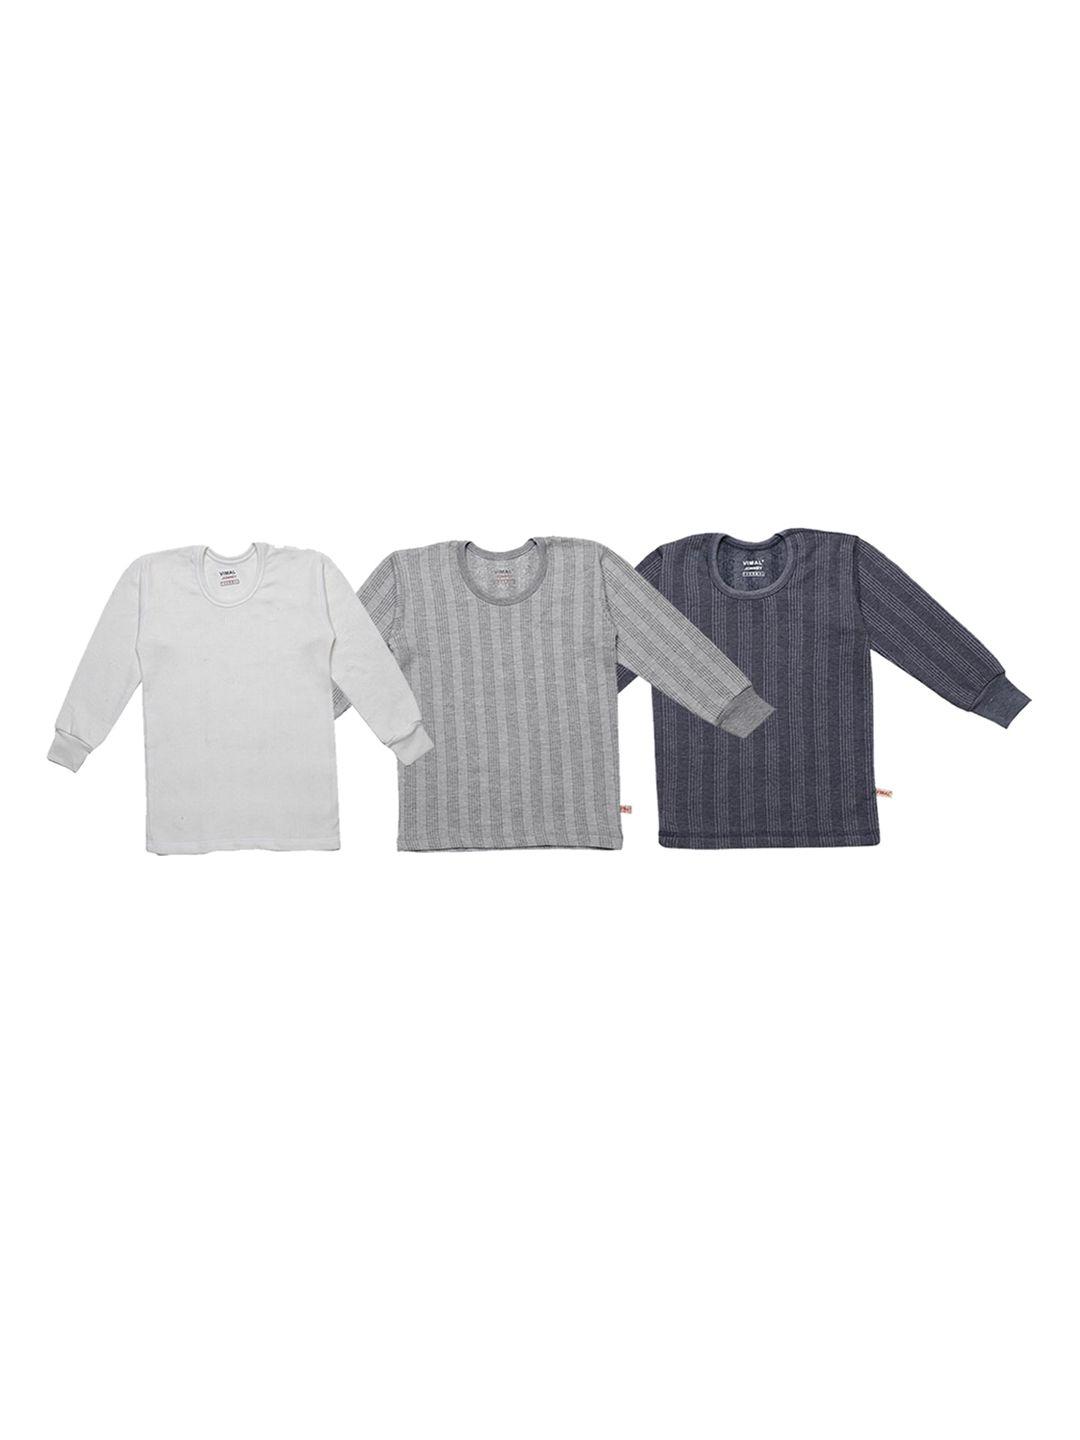 vimal-jonney-kids-pack-of-3-striped-cotton-thermal-tops